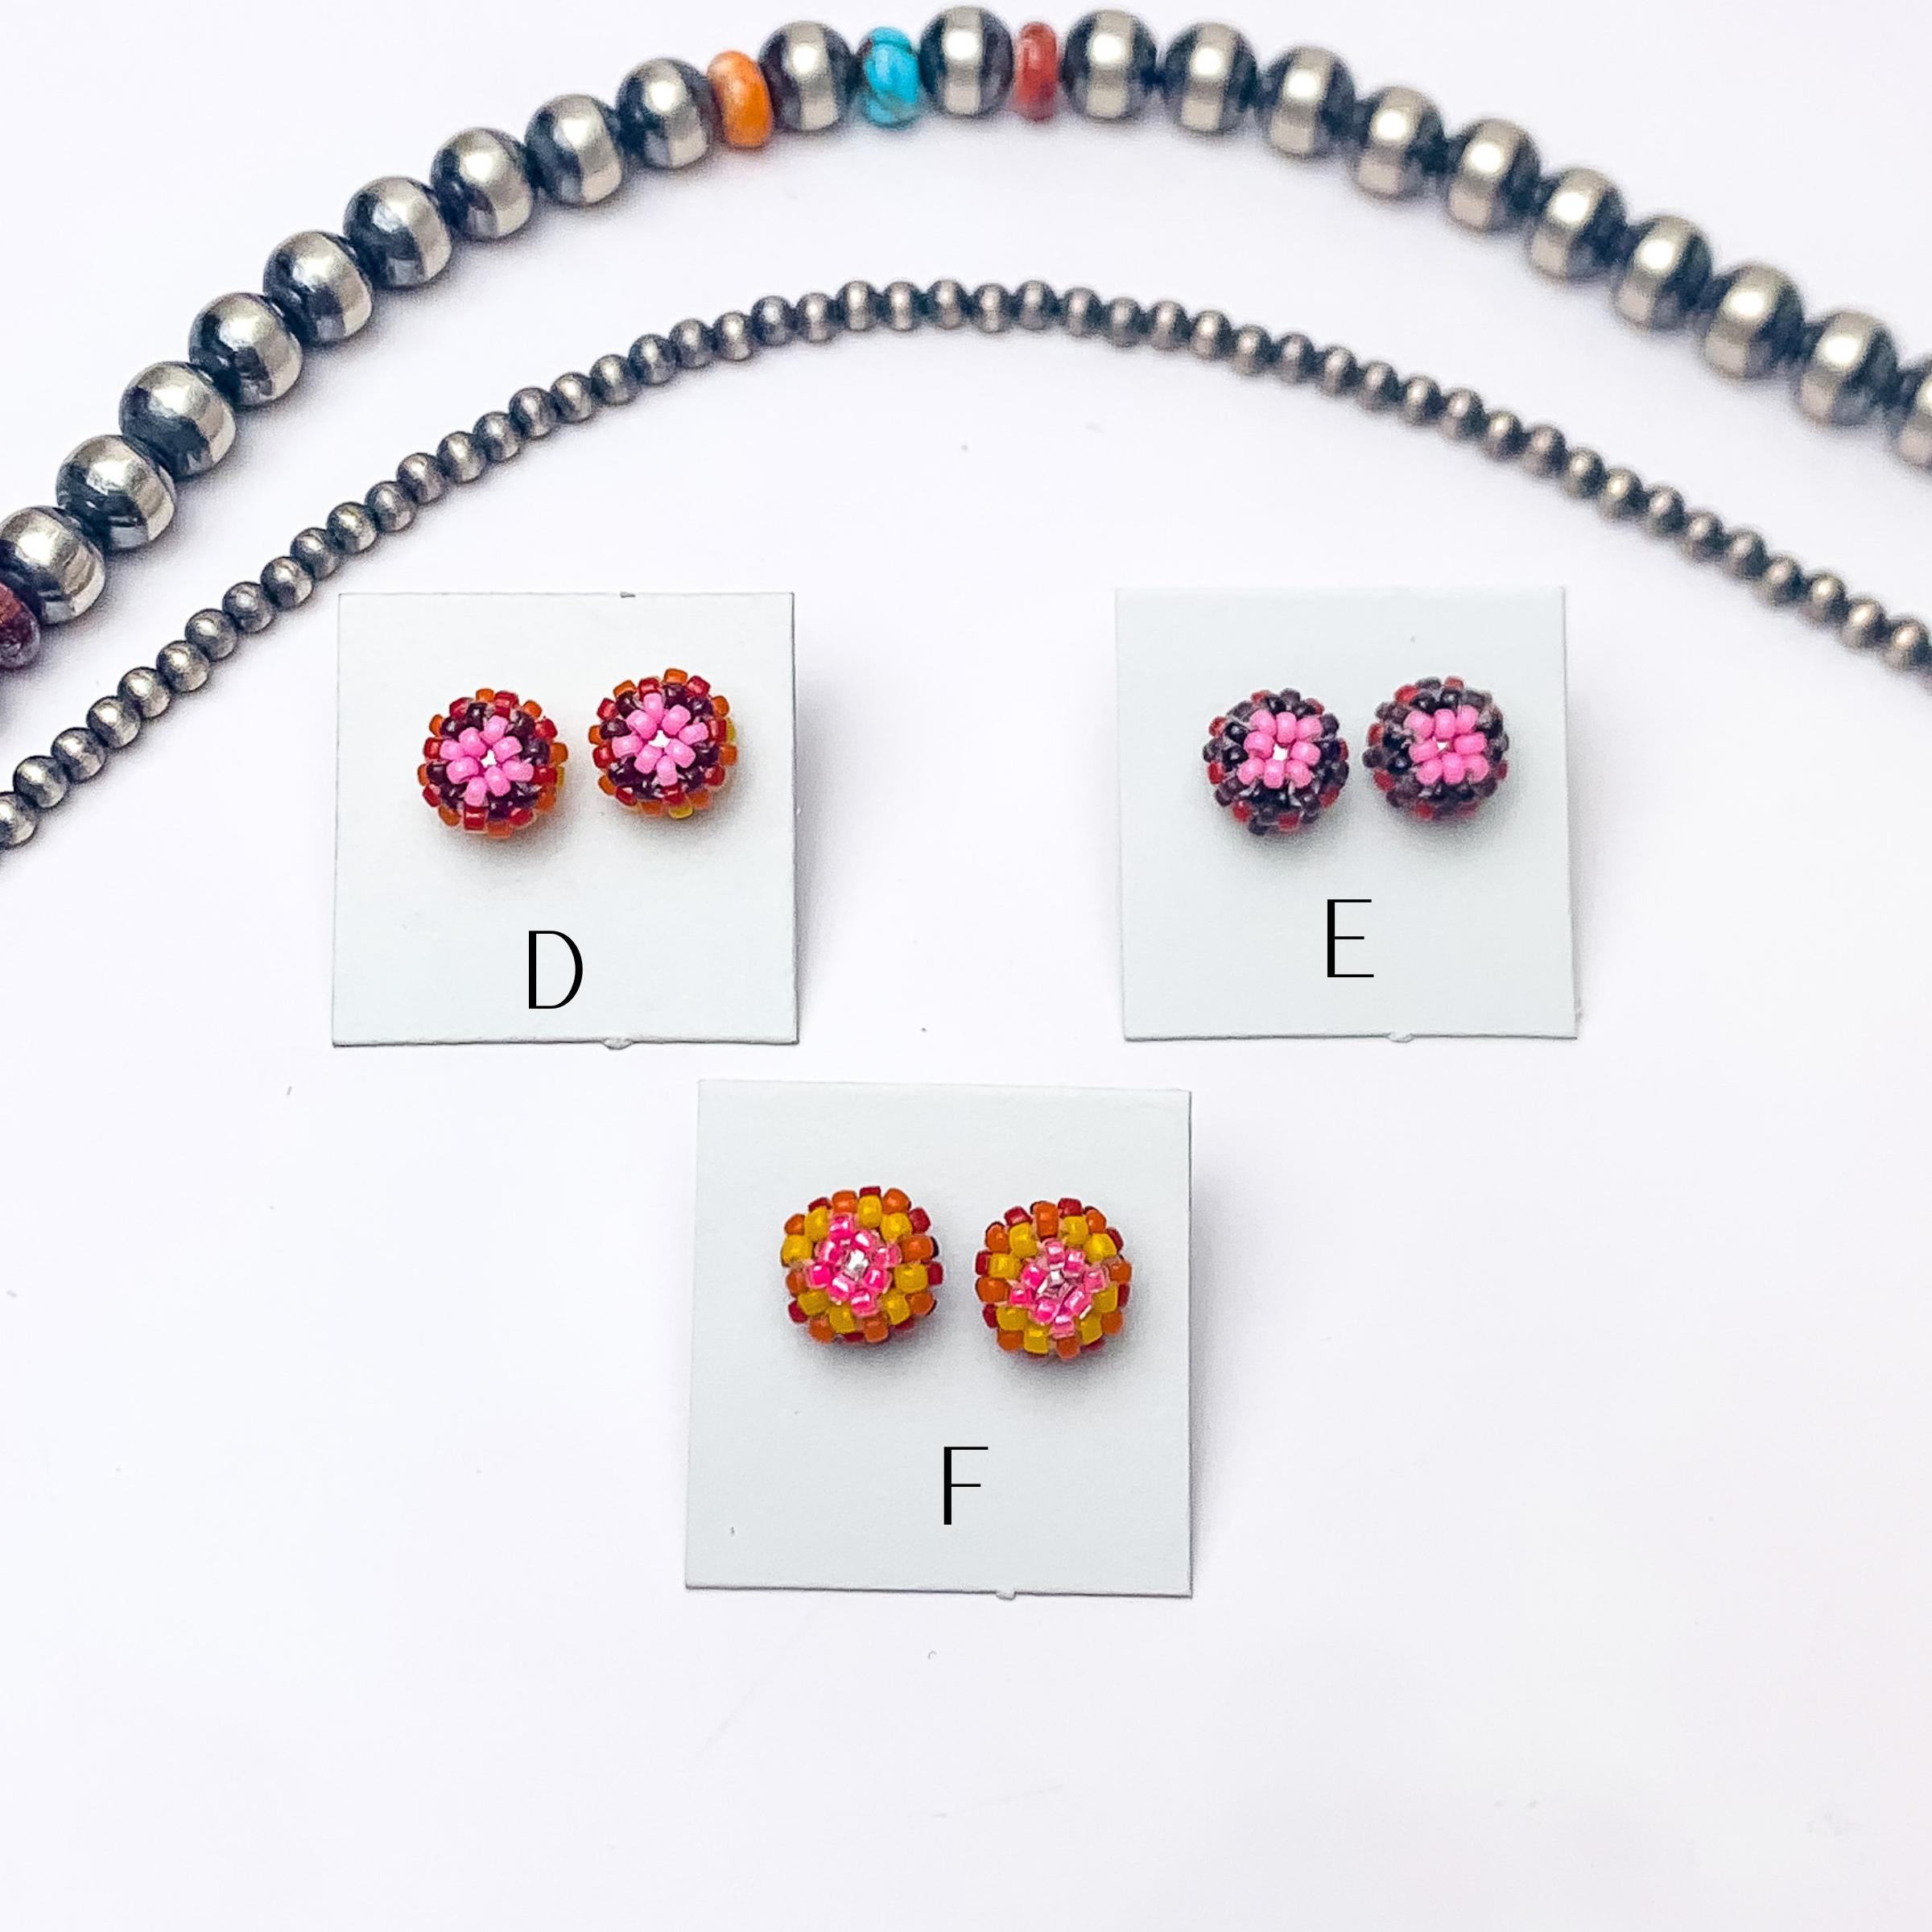 Navajo | Navajo Handmade Beaded Stud Earrings in Pink, Yellow, Orange and Black - Giddy Up Glamour Boutique